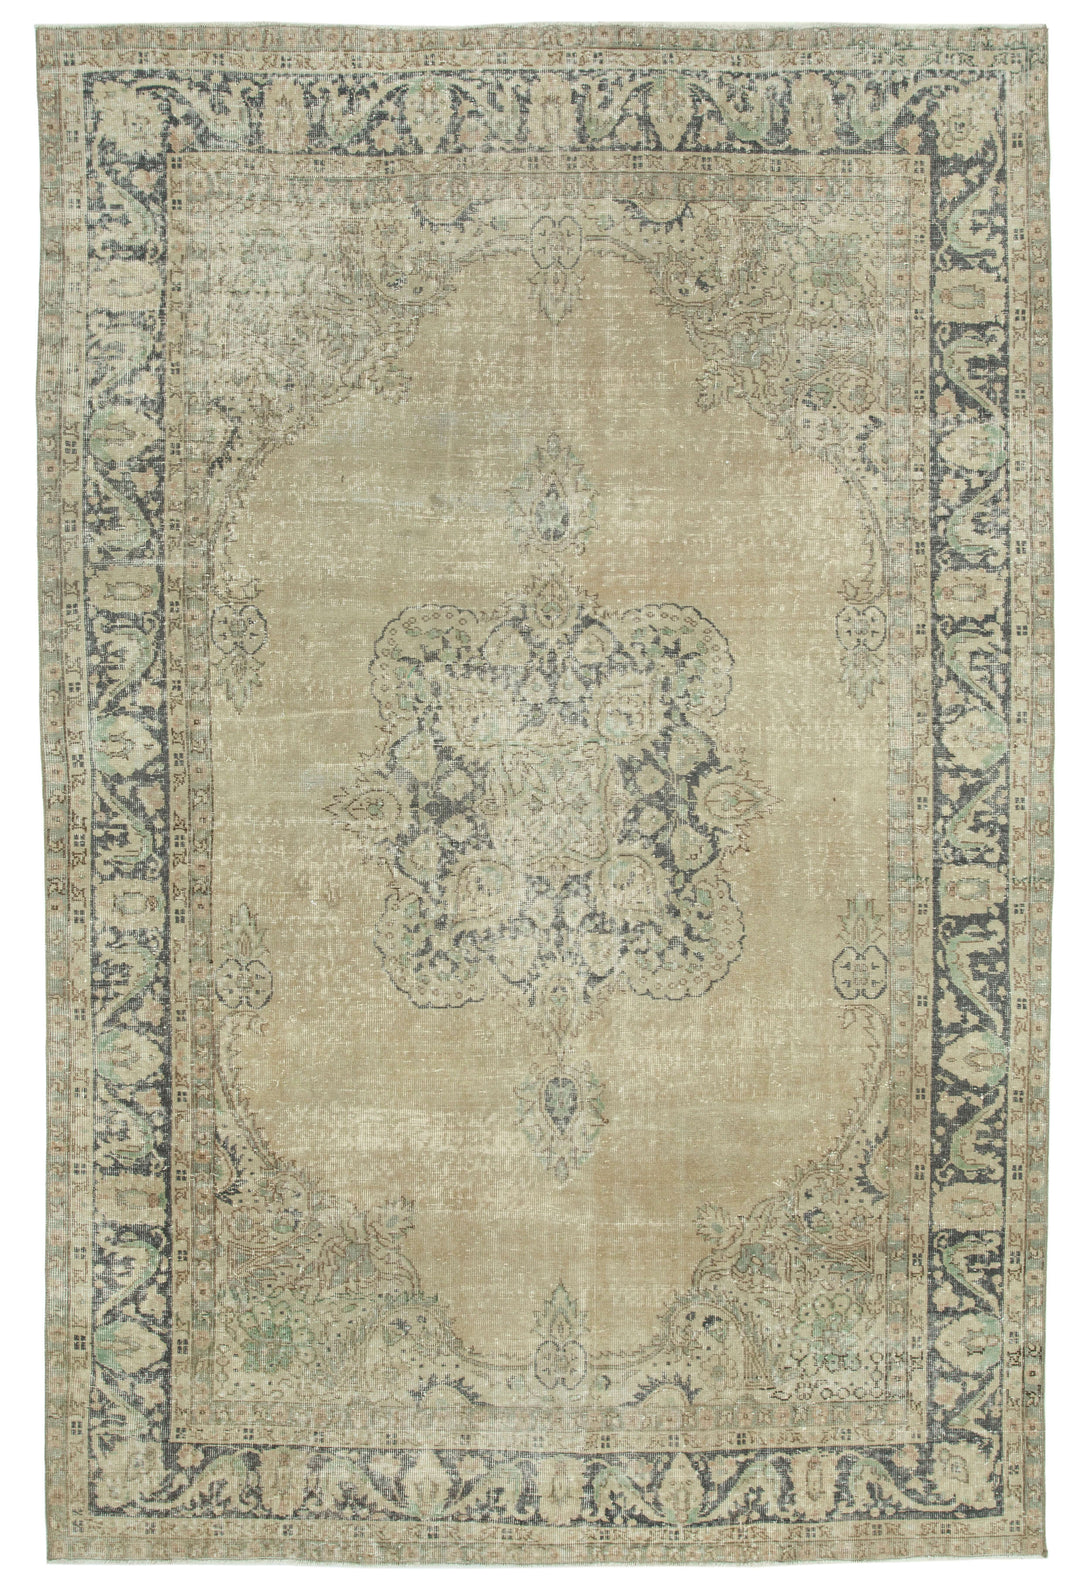 Handmade White Wash Area Rug > Design# OL-AC-25188 > Size: 6'-9" x 10'-2", Carpet Culture Rugs, Handmade Rugs, NYC Rugs, New Rugs, Shop Rugs, Rug Store, Outlet Rugs, SoHo Rugs, Rugs in USA